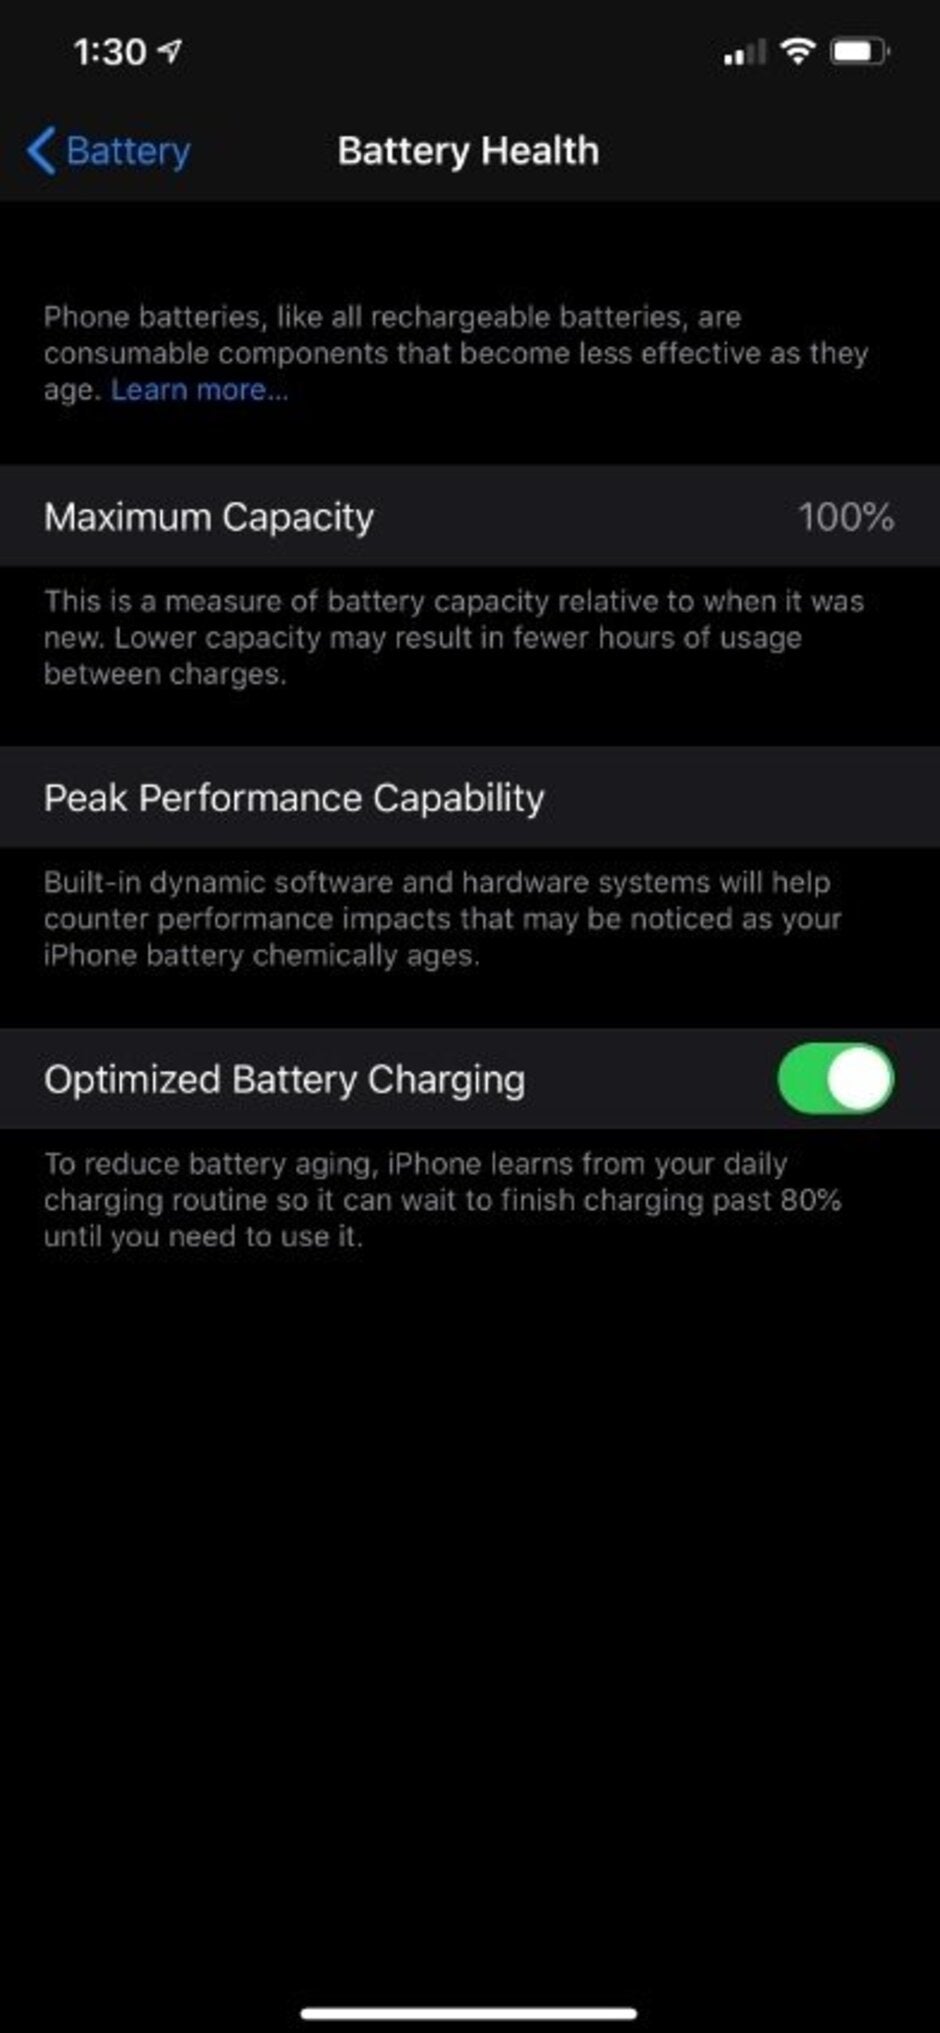 The Battery Health feature on iOS makes sure that your iPhone's battery is healthy enough to use - Apple may owe you some money after settling iPhone throttling suit